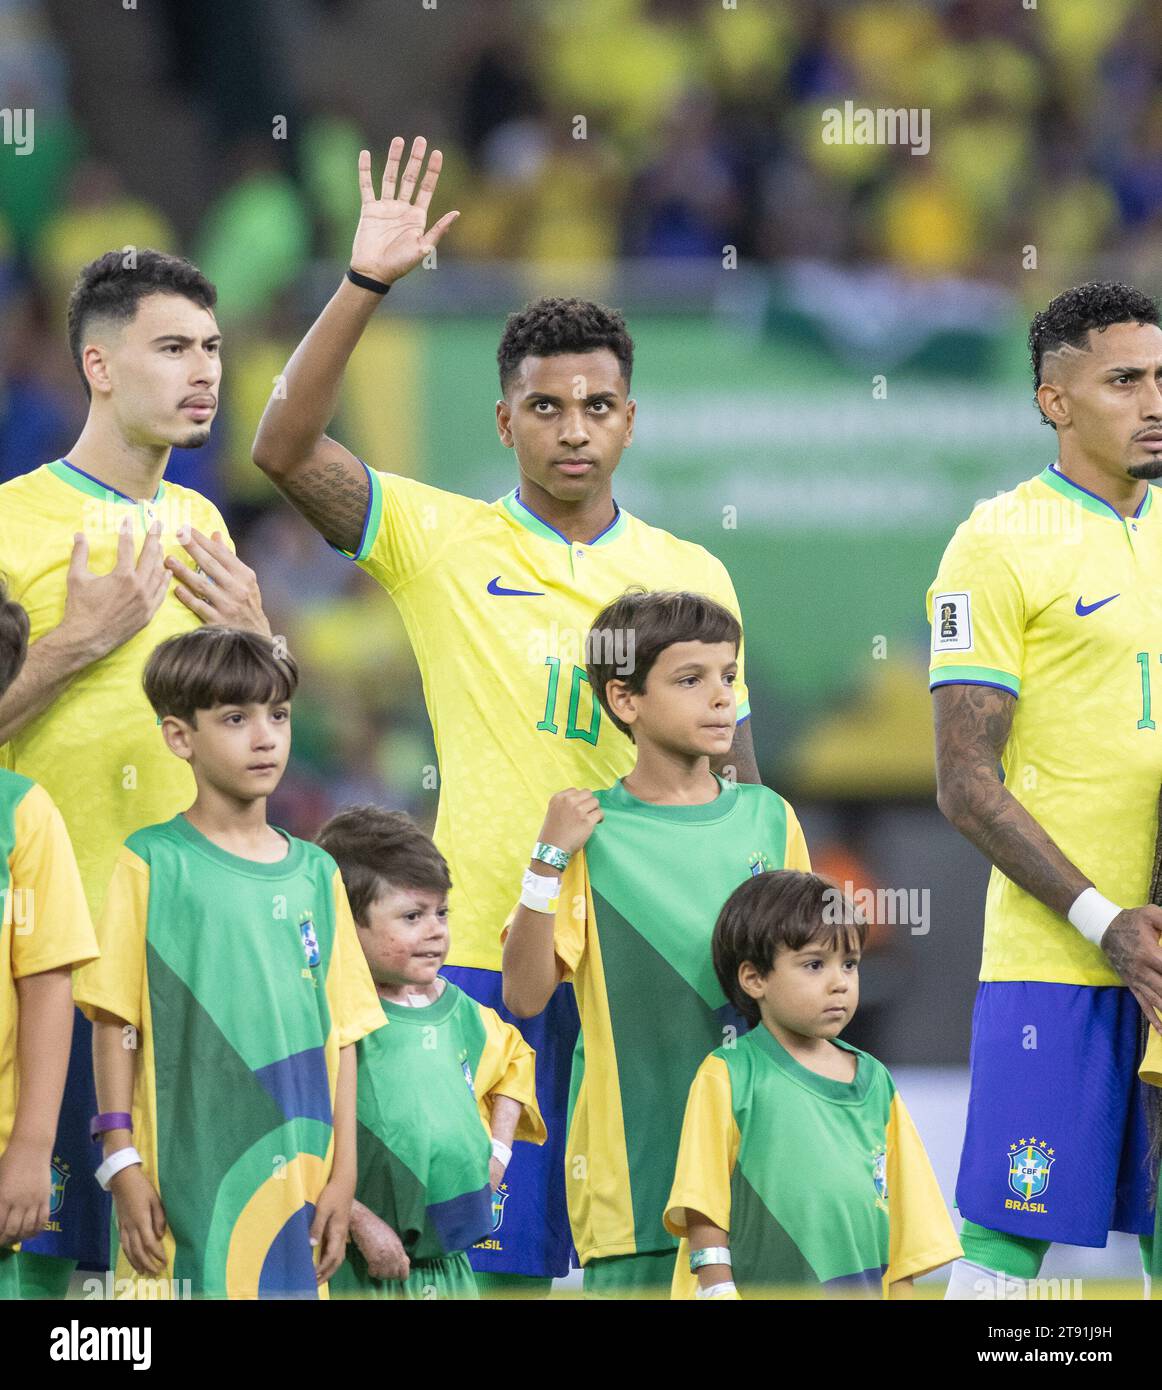 Rio De Janeiro, Brazil. 21st Nov, 2023. RIO DE JANEIRO, BRAZIL - NOVEMBER 21: Rodrygo of Brazil waves before a match between Brazil and Argentina as part of 2026 FIFA World Cup South American Qualification at Maracana Stadium on November 21, 2023 in Rio de Janeiro, Brazil. (Photo by Wanderson Oliveira/PxImages) Credit: Px Images/Alamy Live News Stock Photo